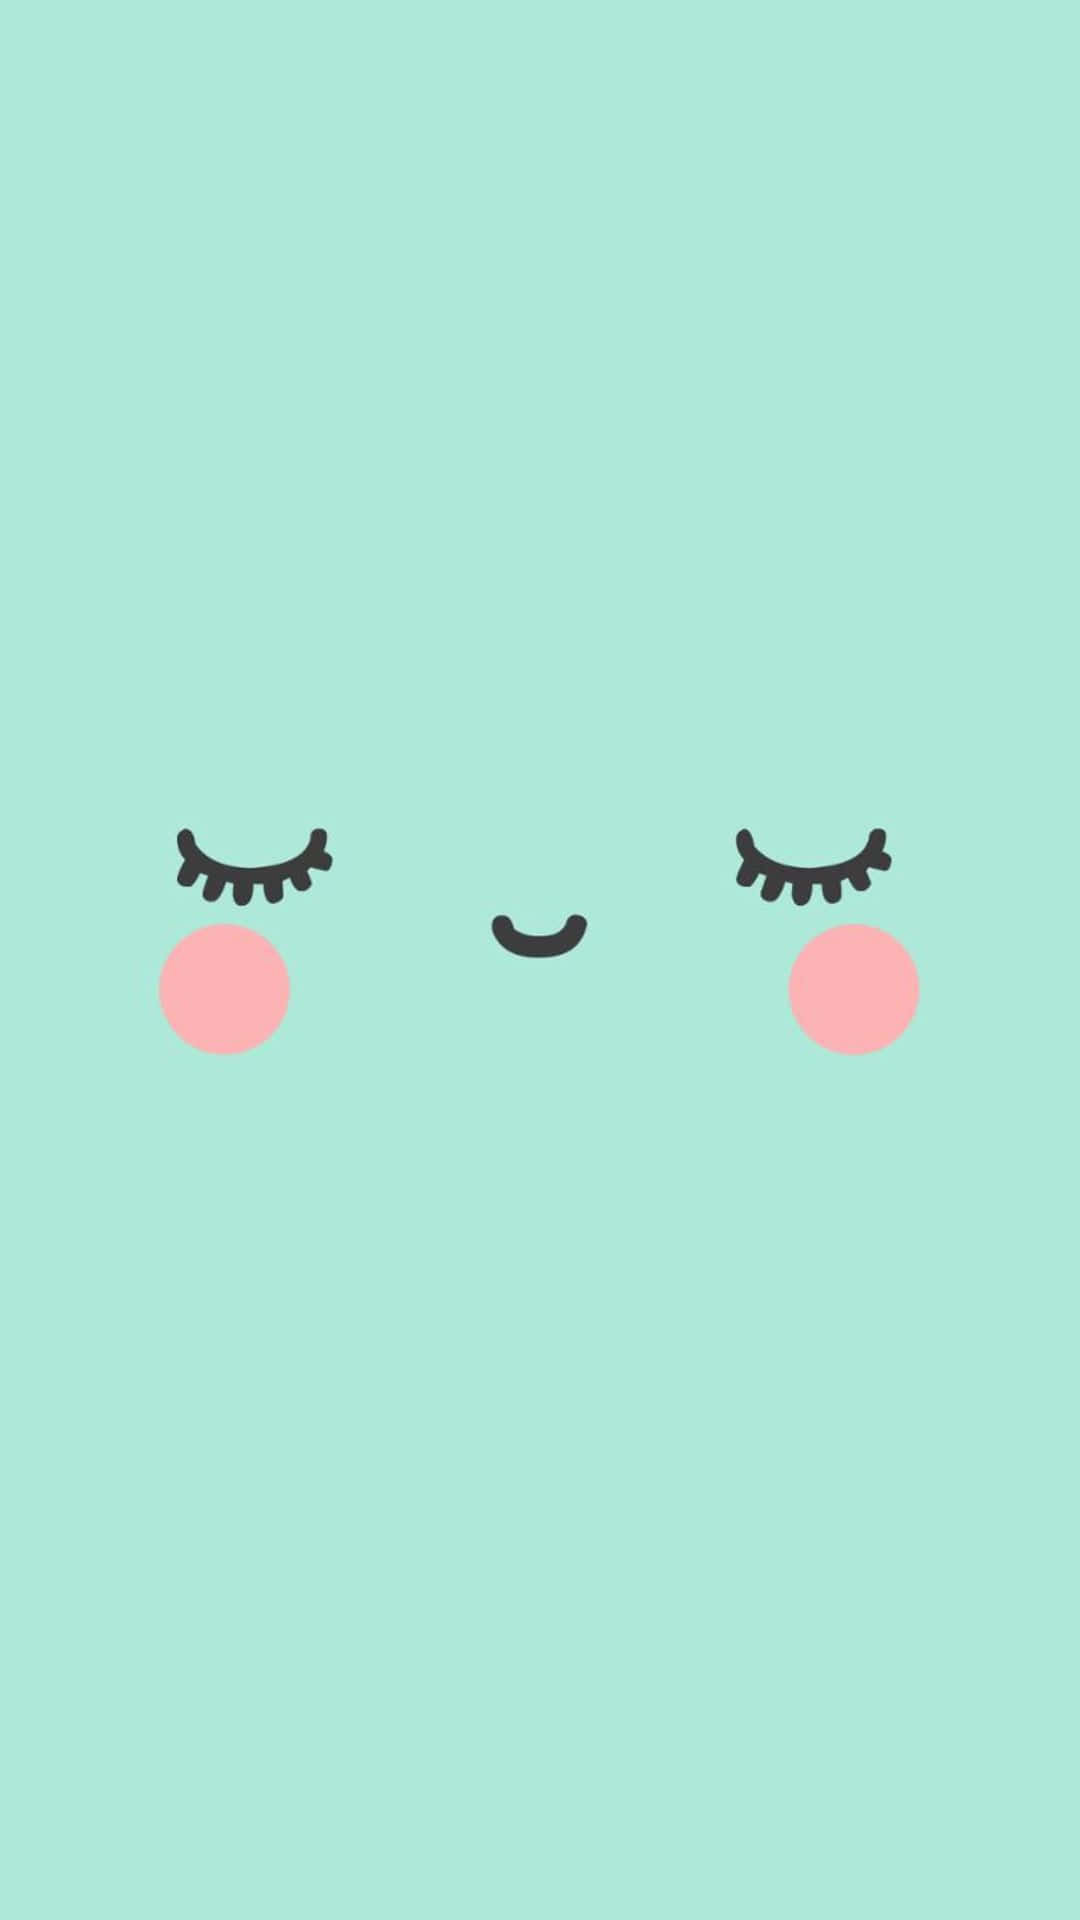 Download Cute Kawaii Emoticons on Pink Background Wallpaper ...